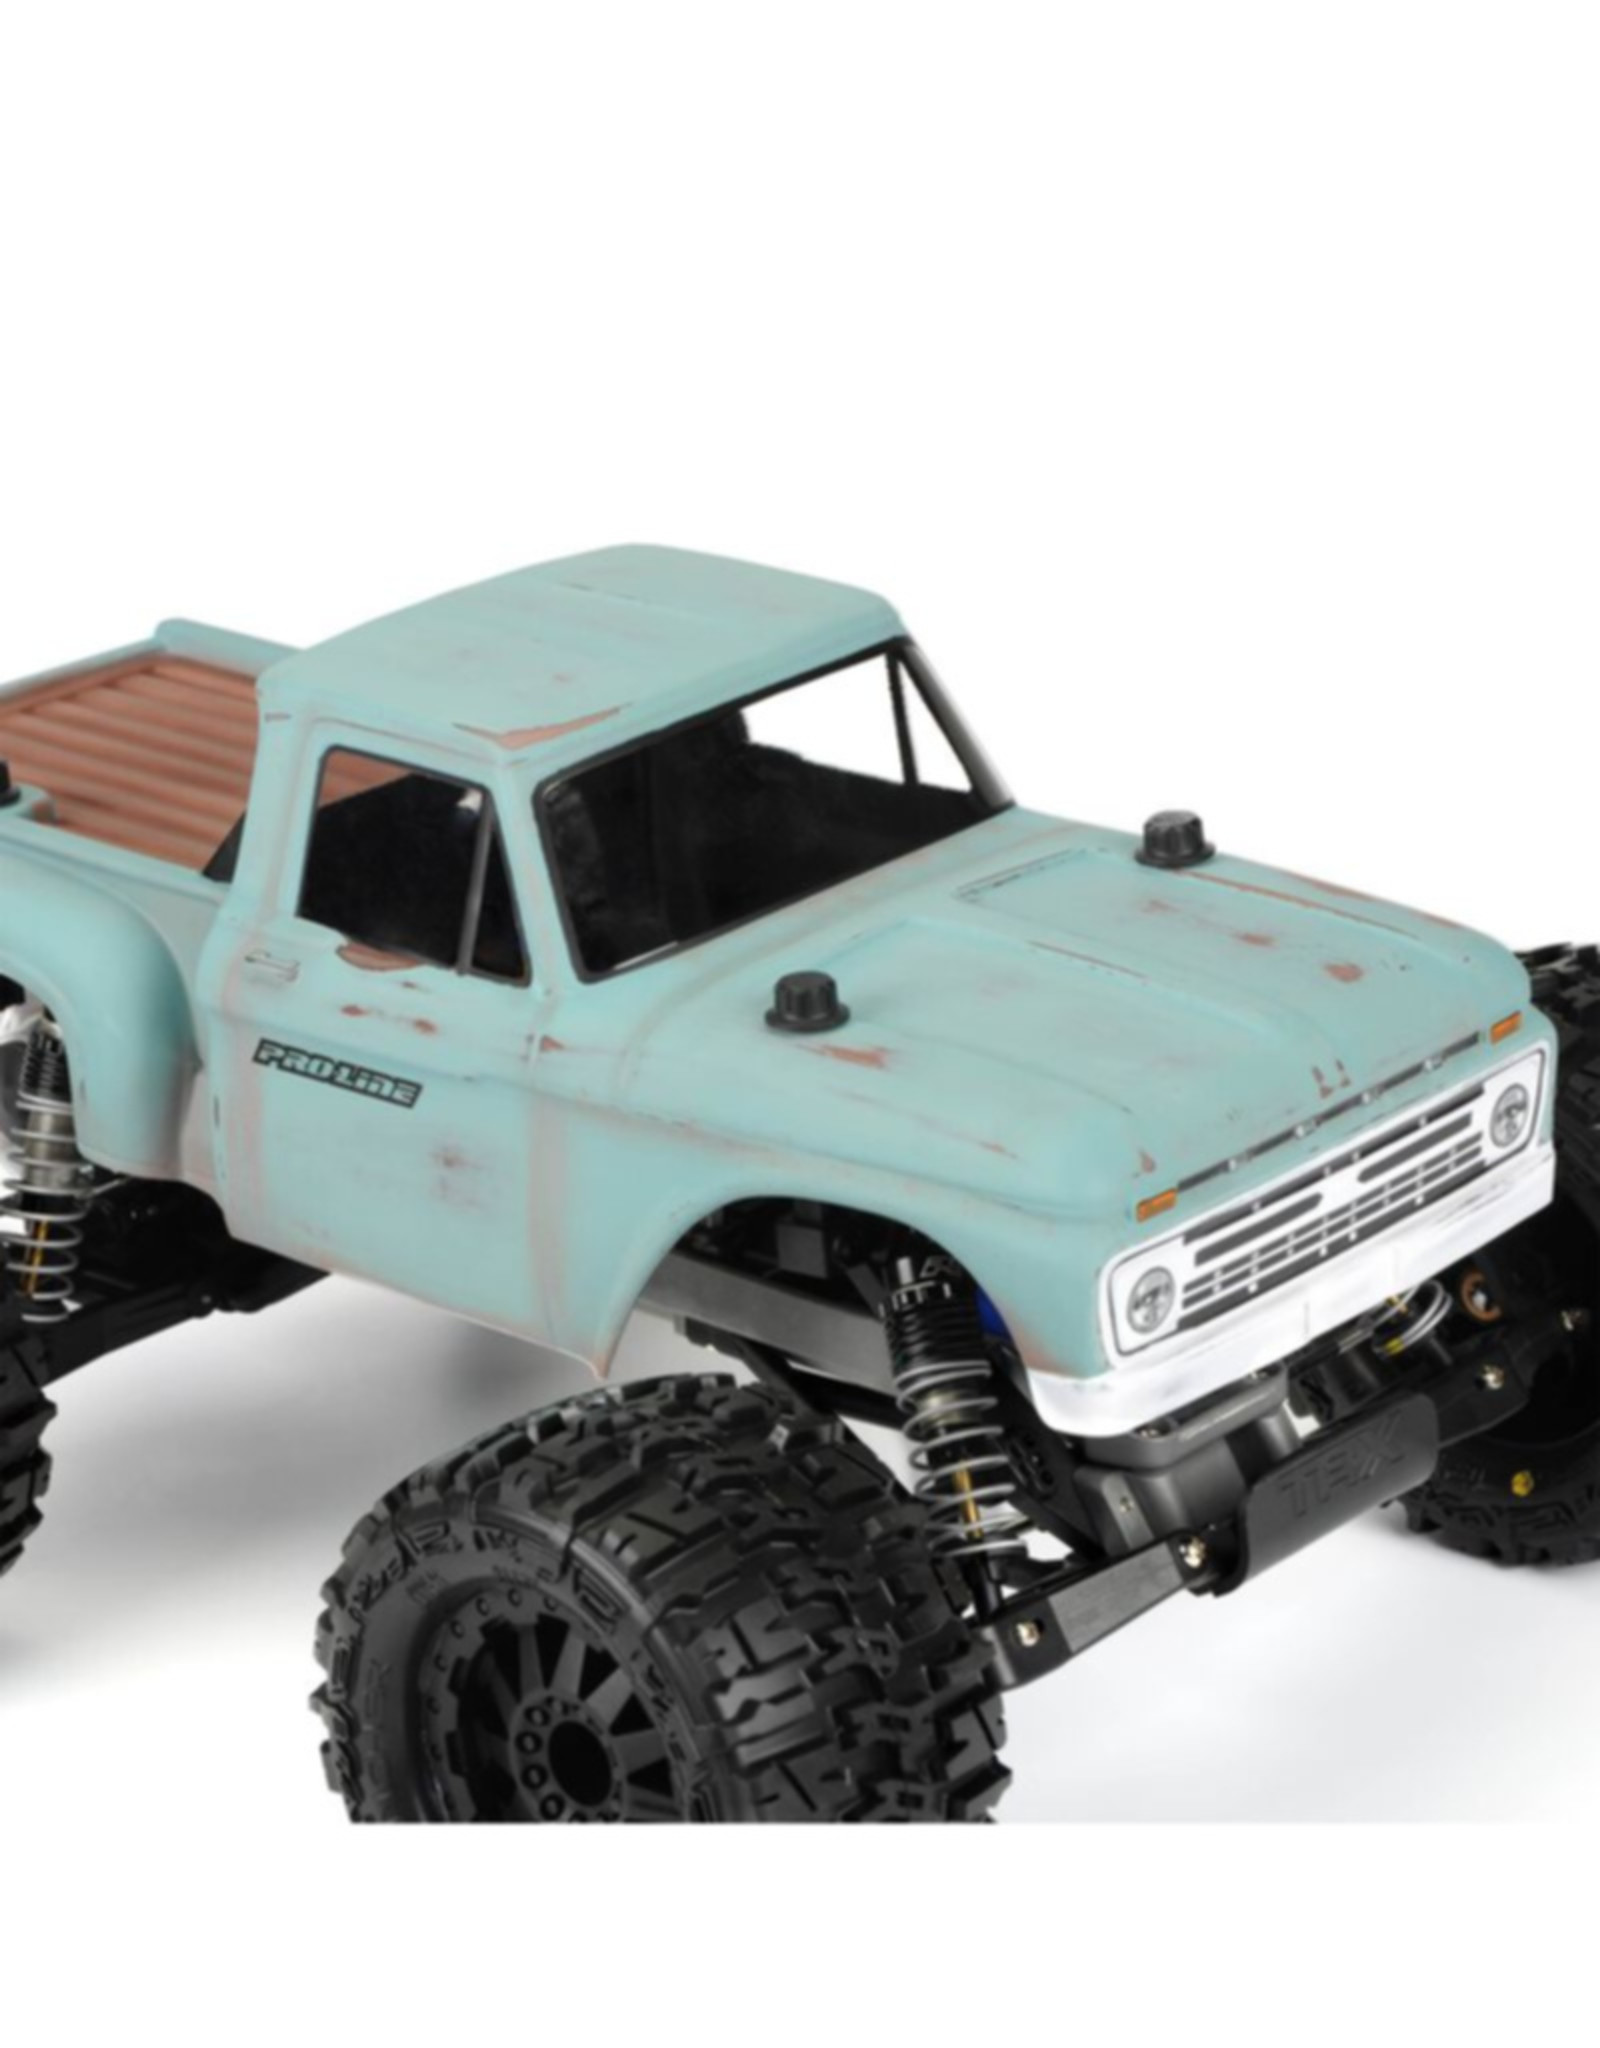 Pro-Line Racing PRO341200 1966 Ford F-100 Clear Body : Stampede